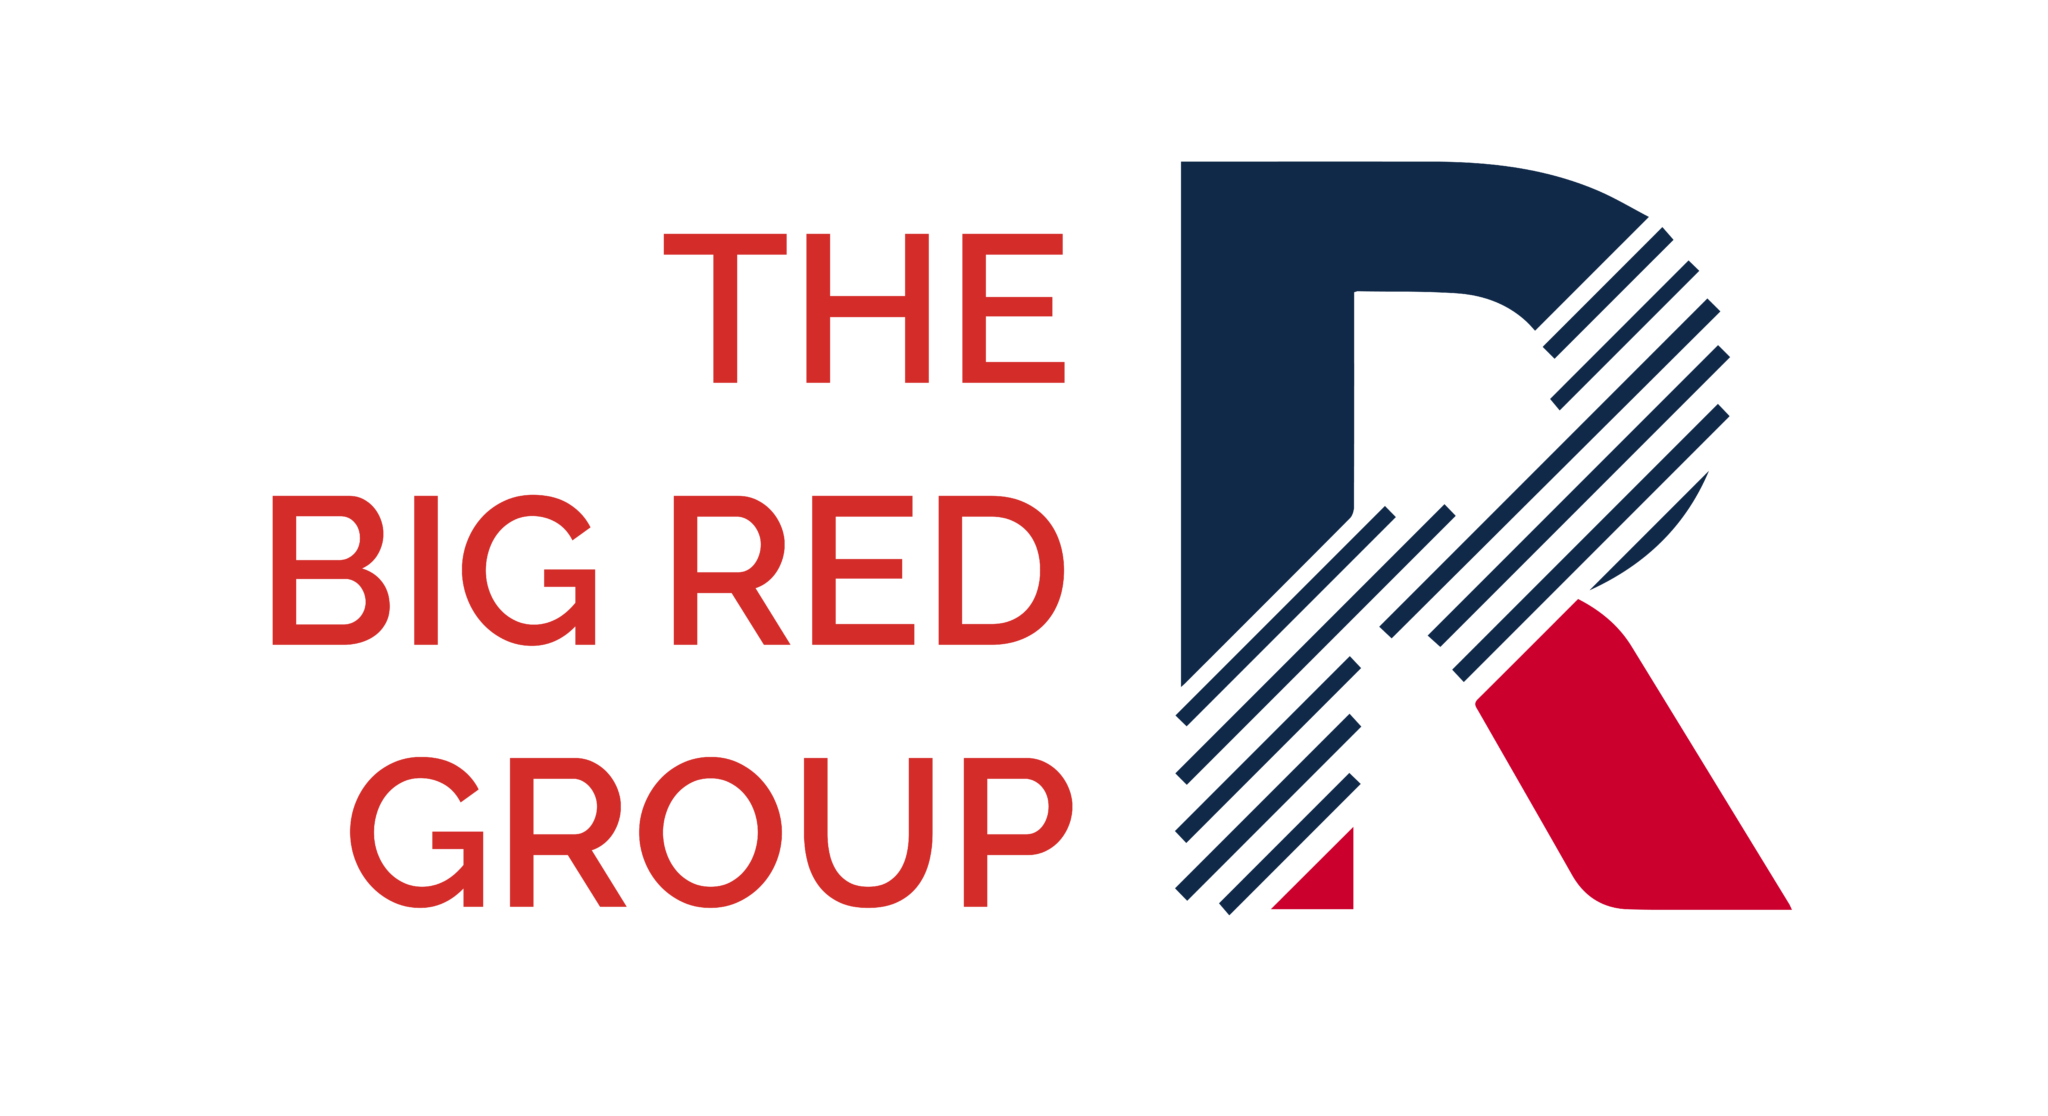 A logo for The Big Red Group featuring a large blue and red letter R with a diagonal line pattern.